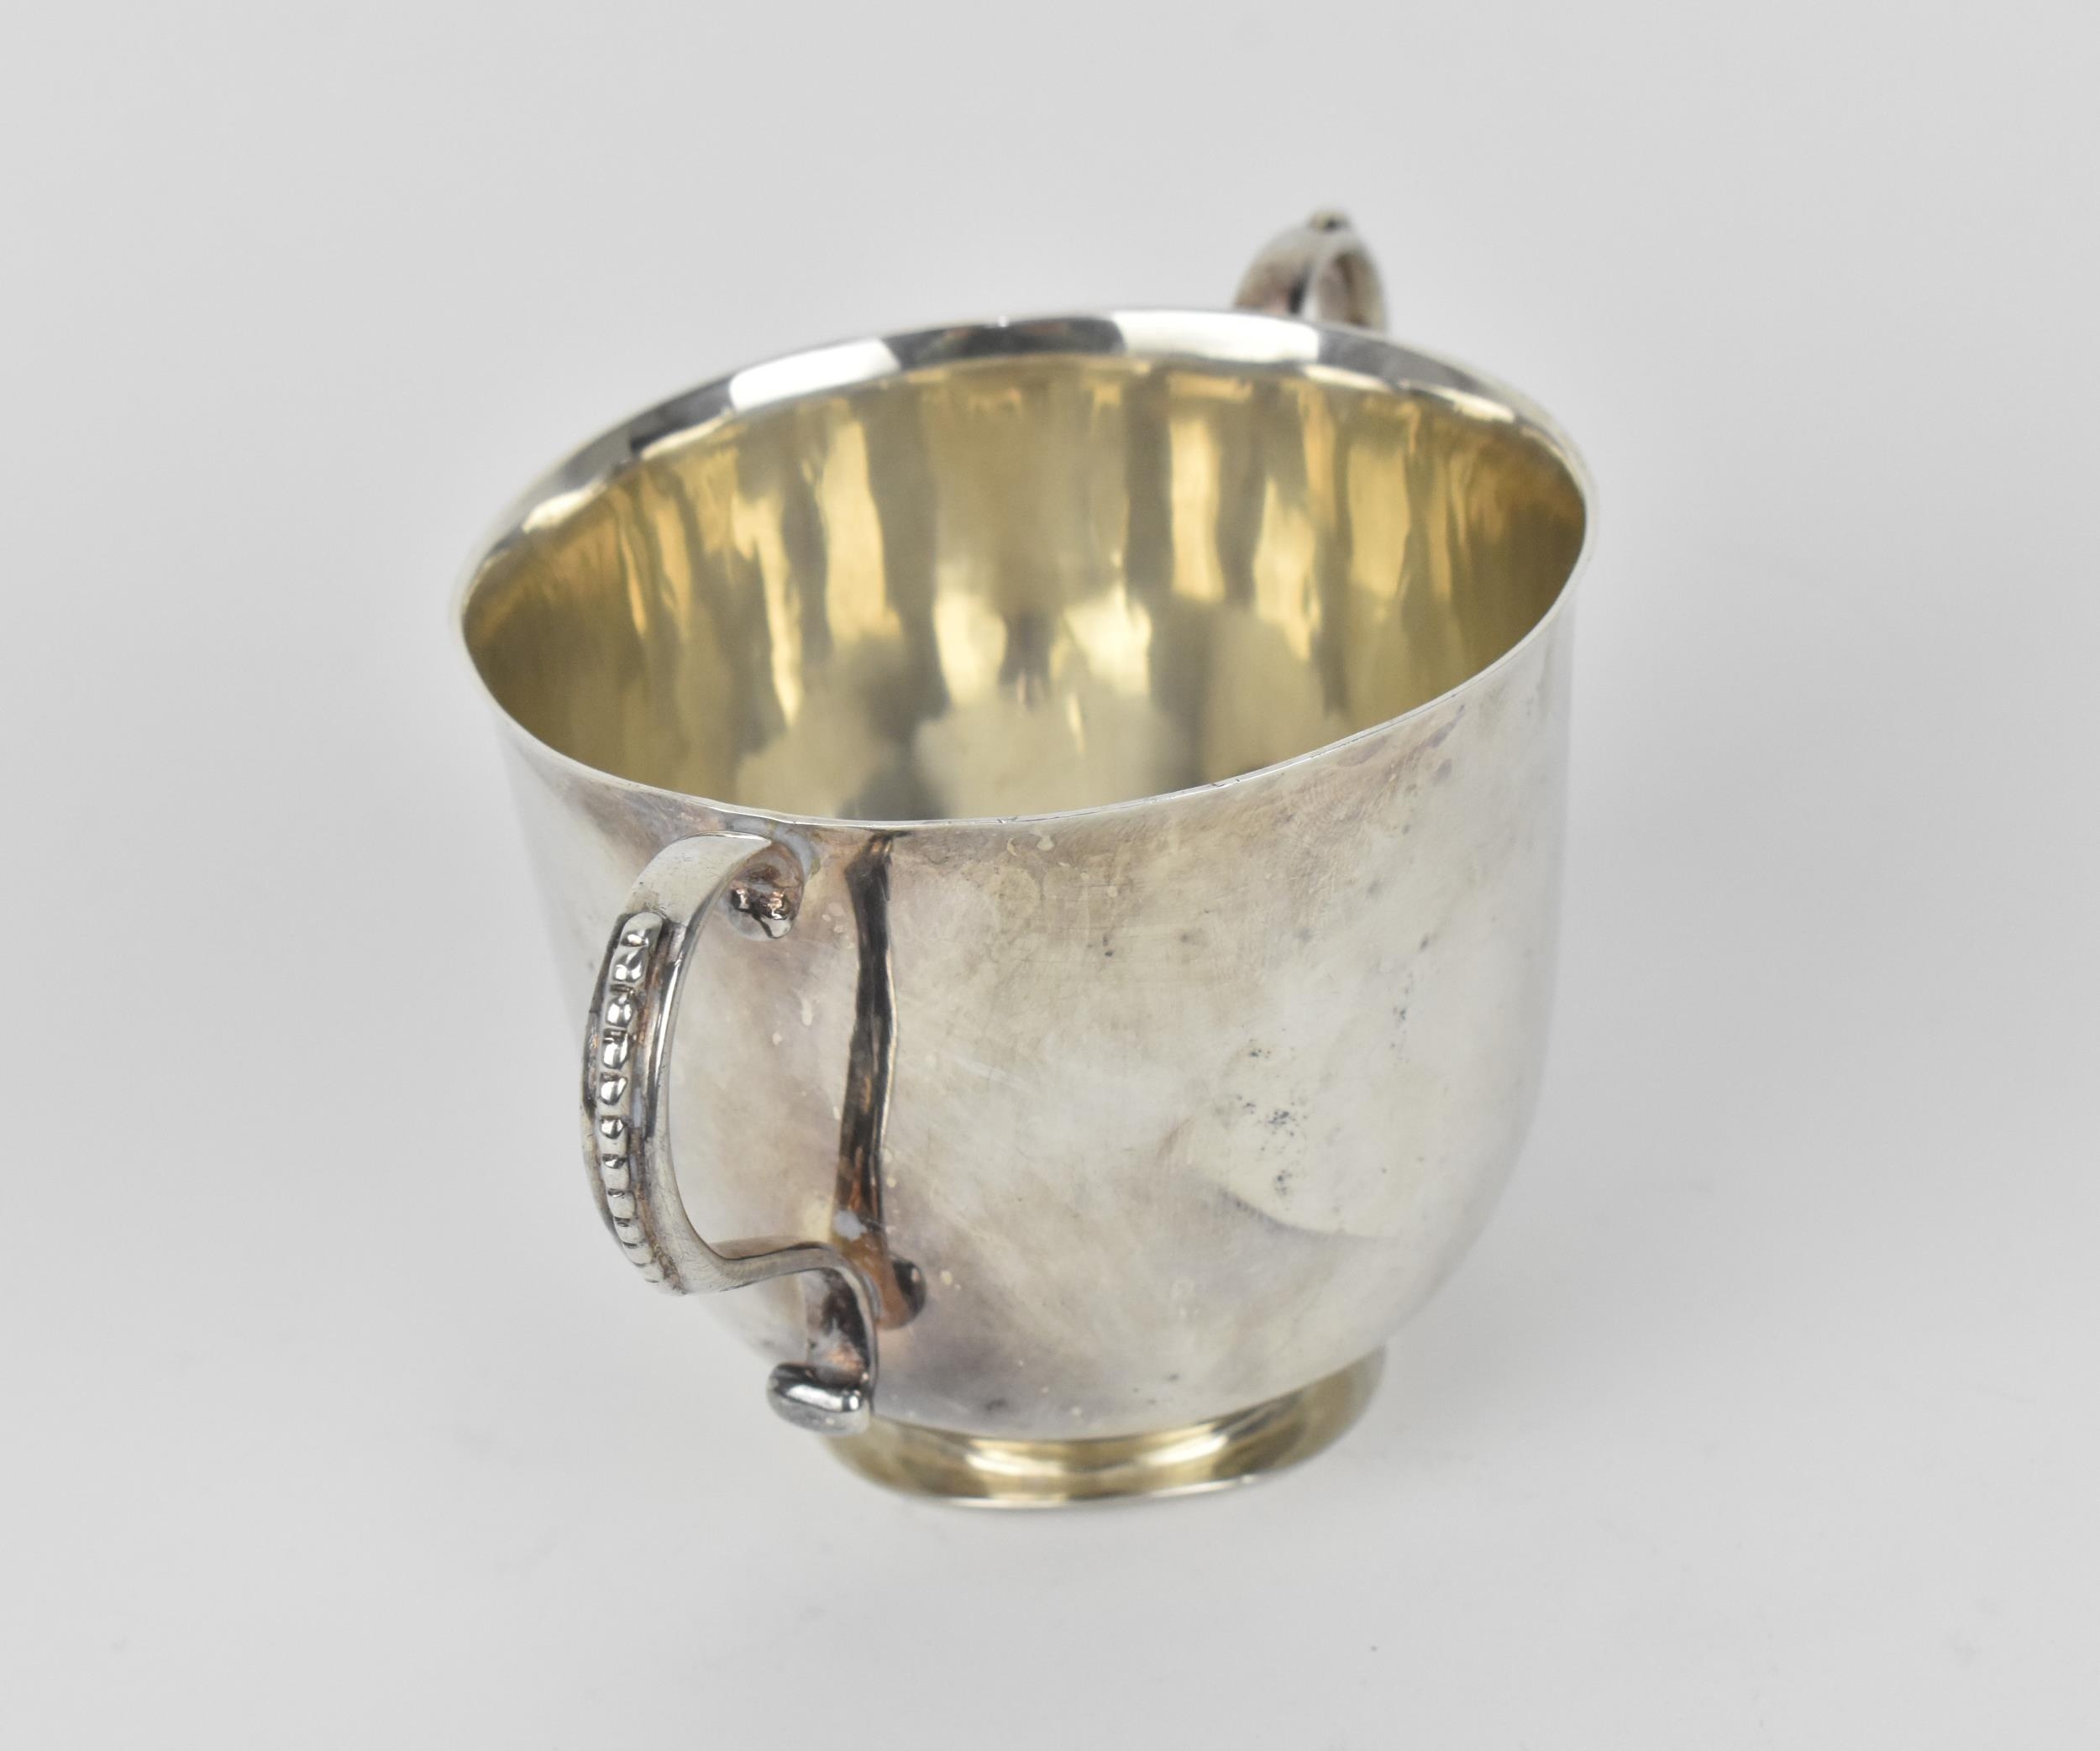 An Edwardian silver porringer by William Comyns, with Britannia hallmark and date letter M for 1907, - Image 2 of 4